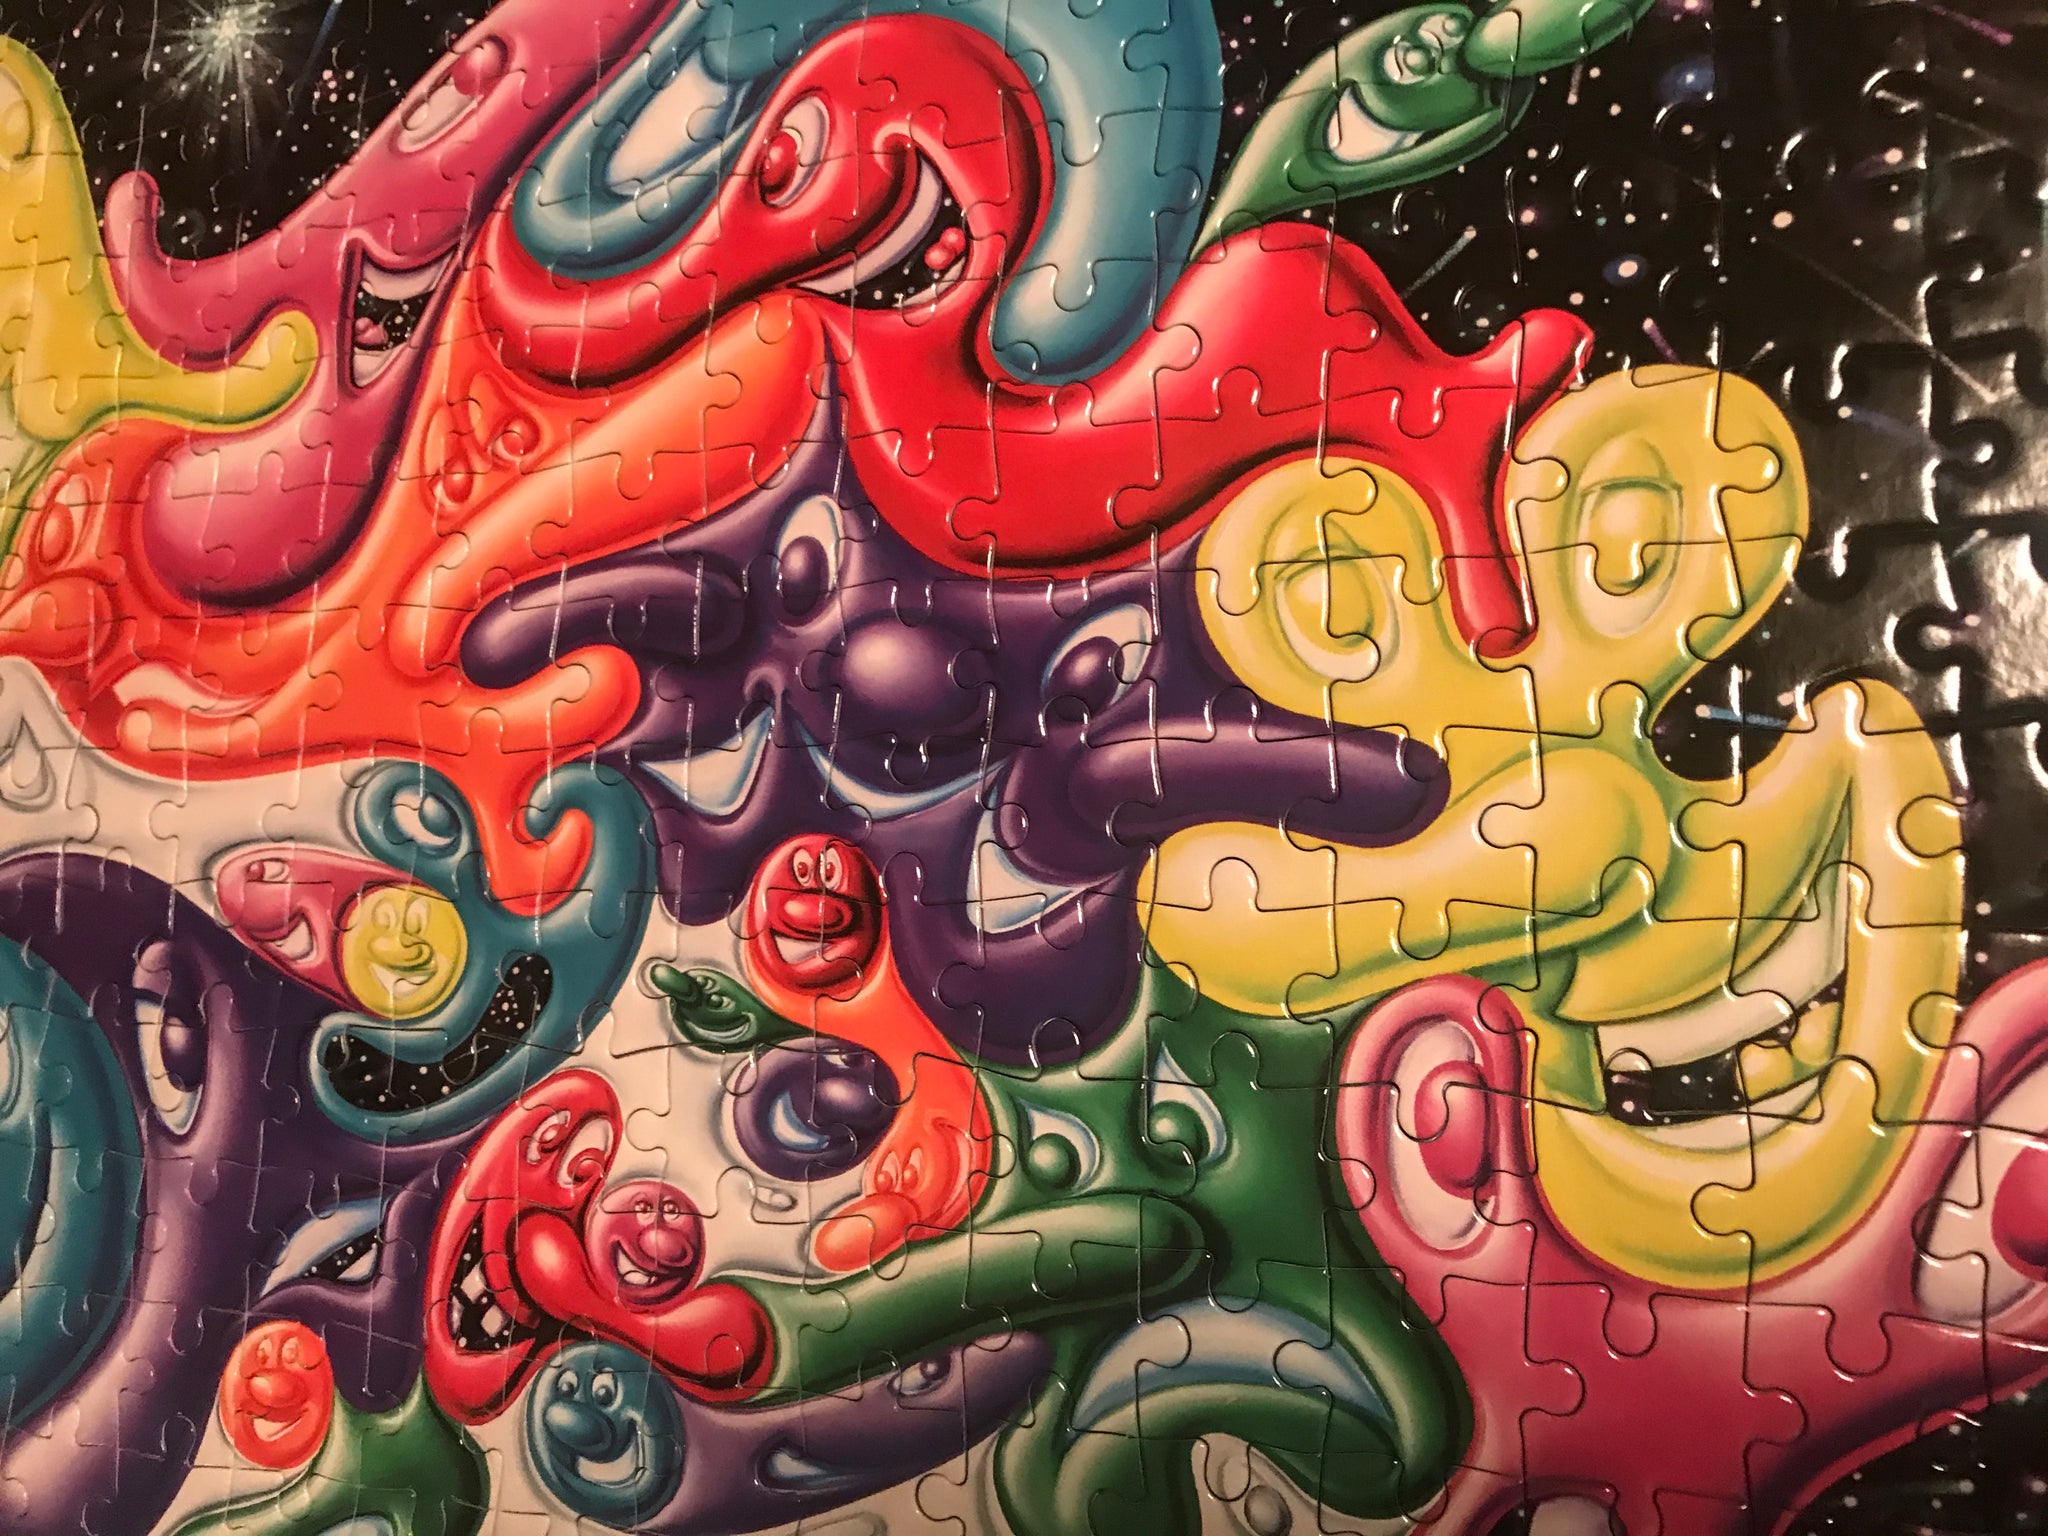 Artist Kenny Scharf Puzzle: Unlimited Collector Edition Jigsaw Puzzle